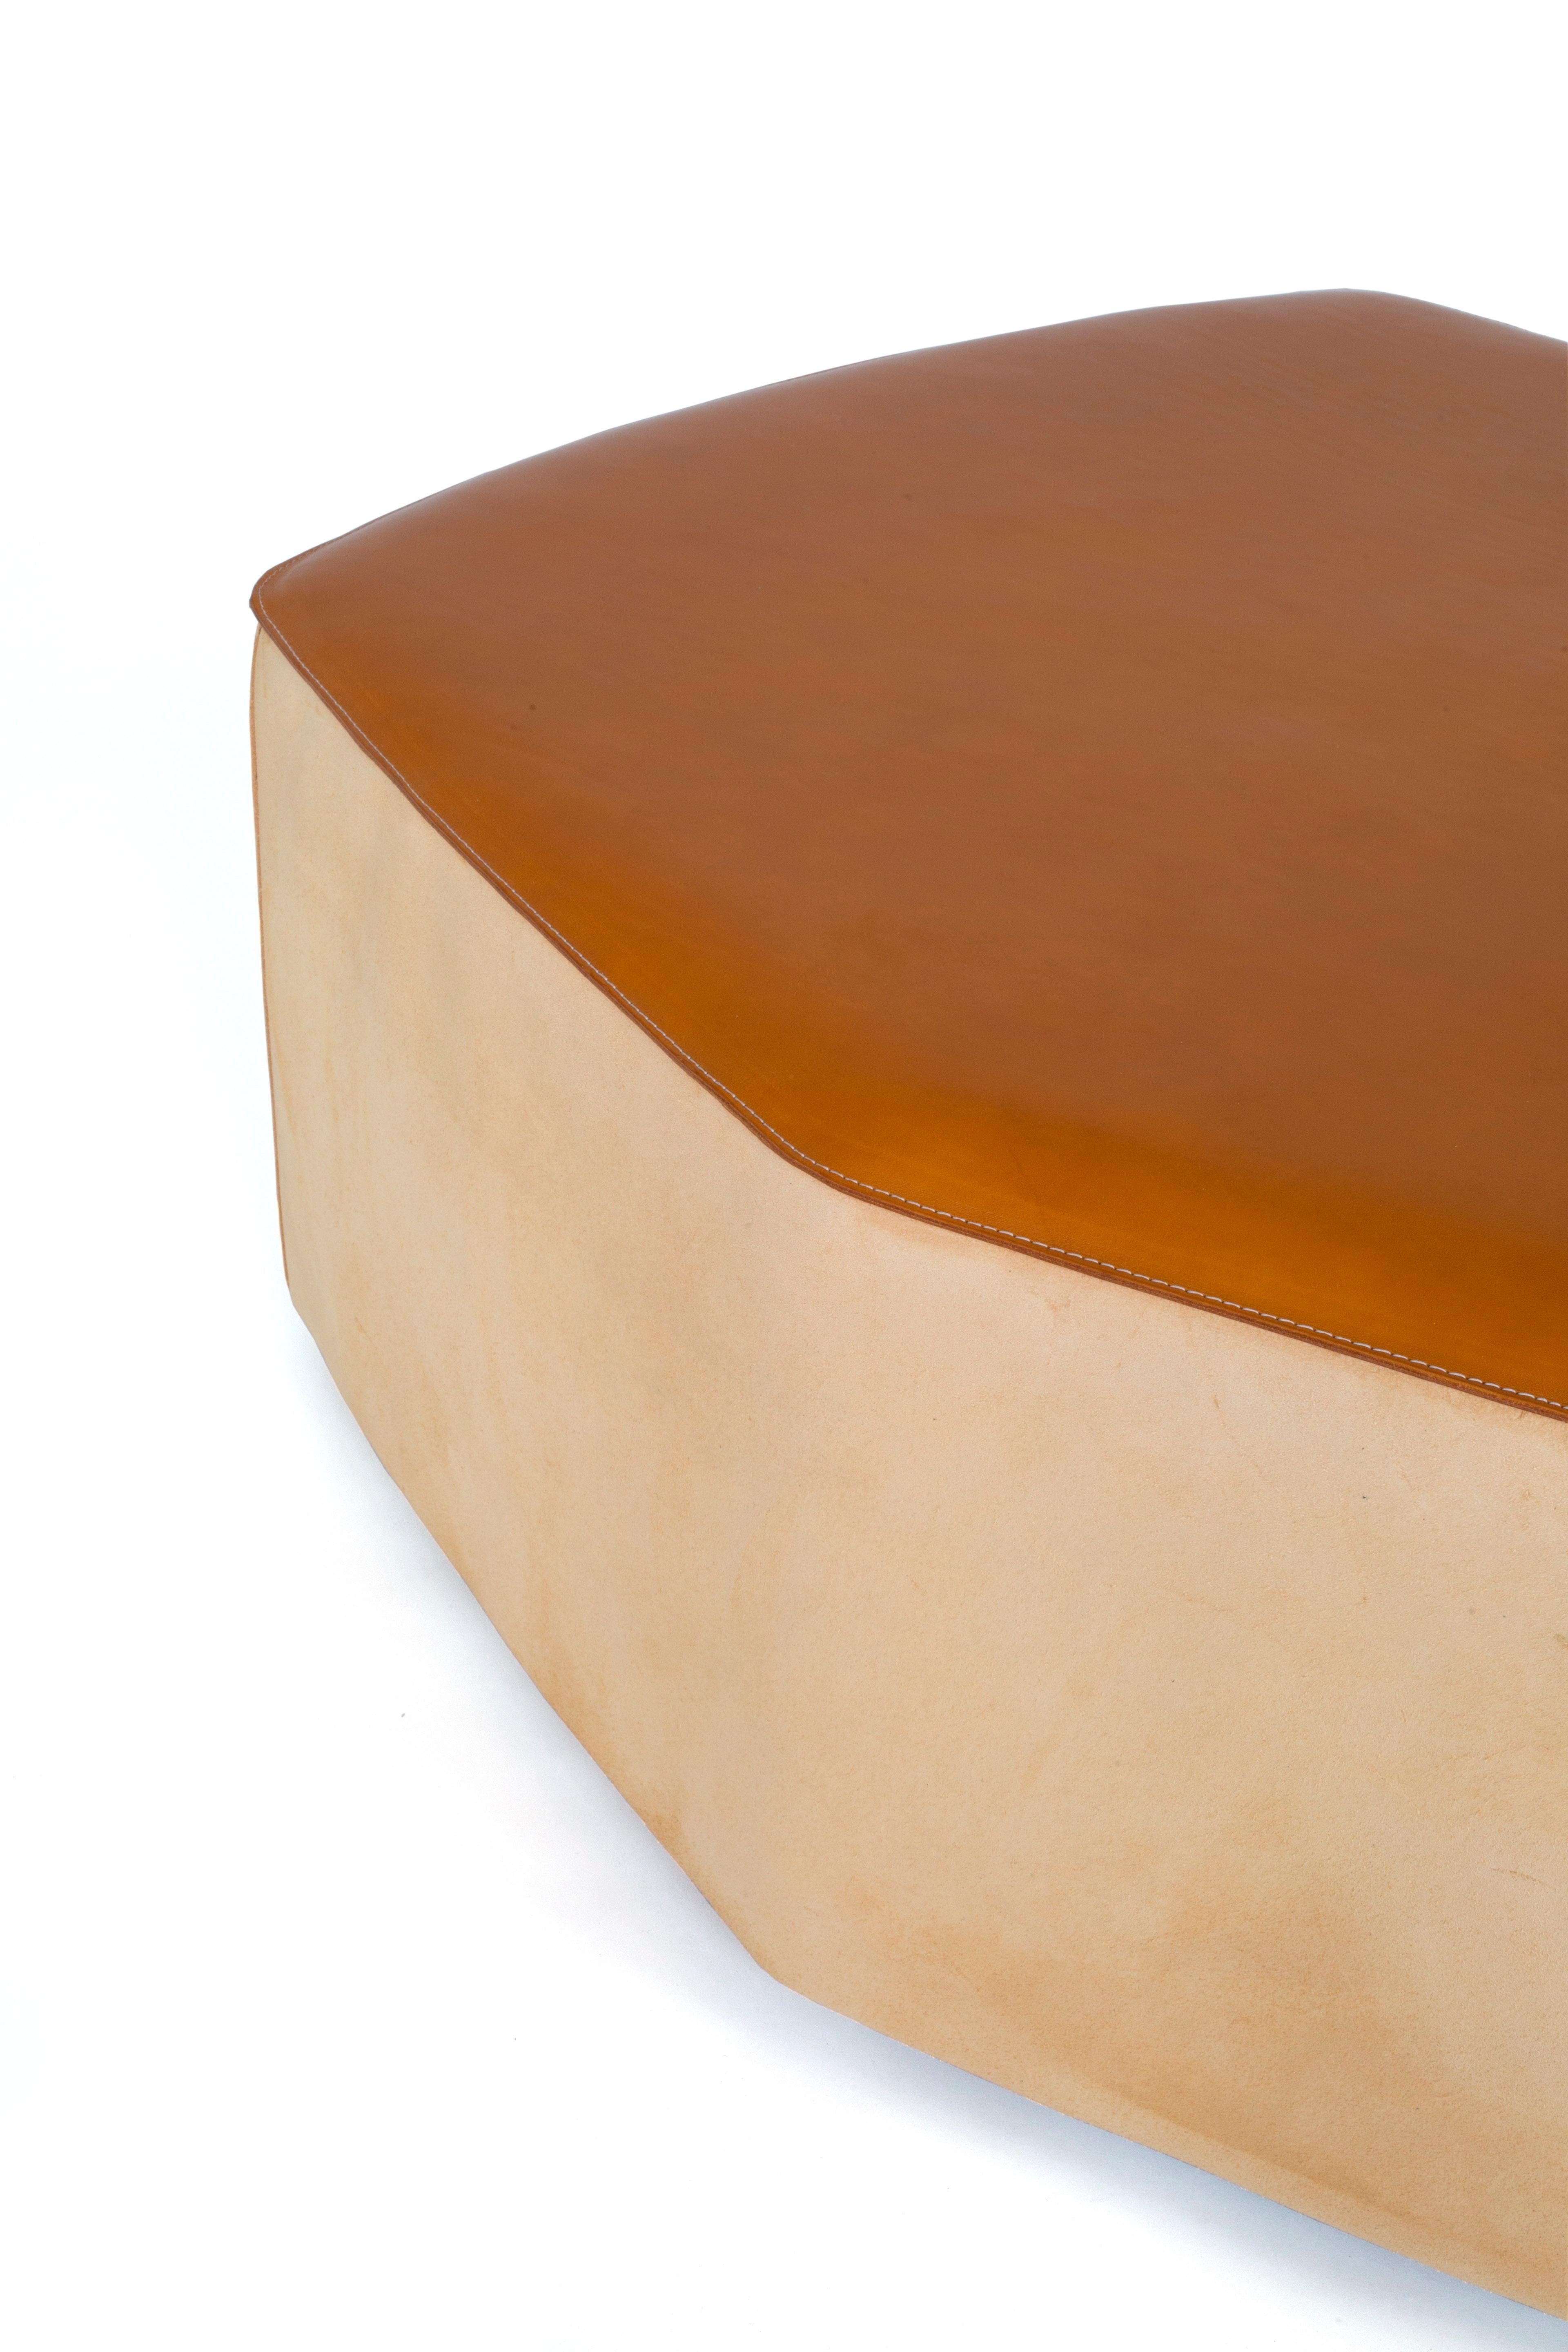 Leather Stools by Nestor Perkal For Sale 11